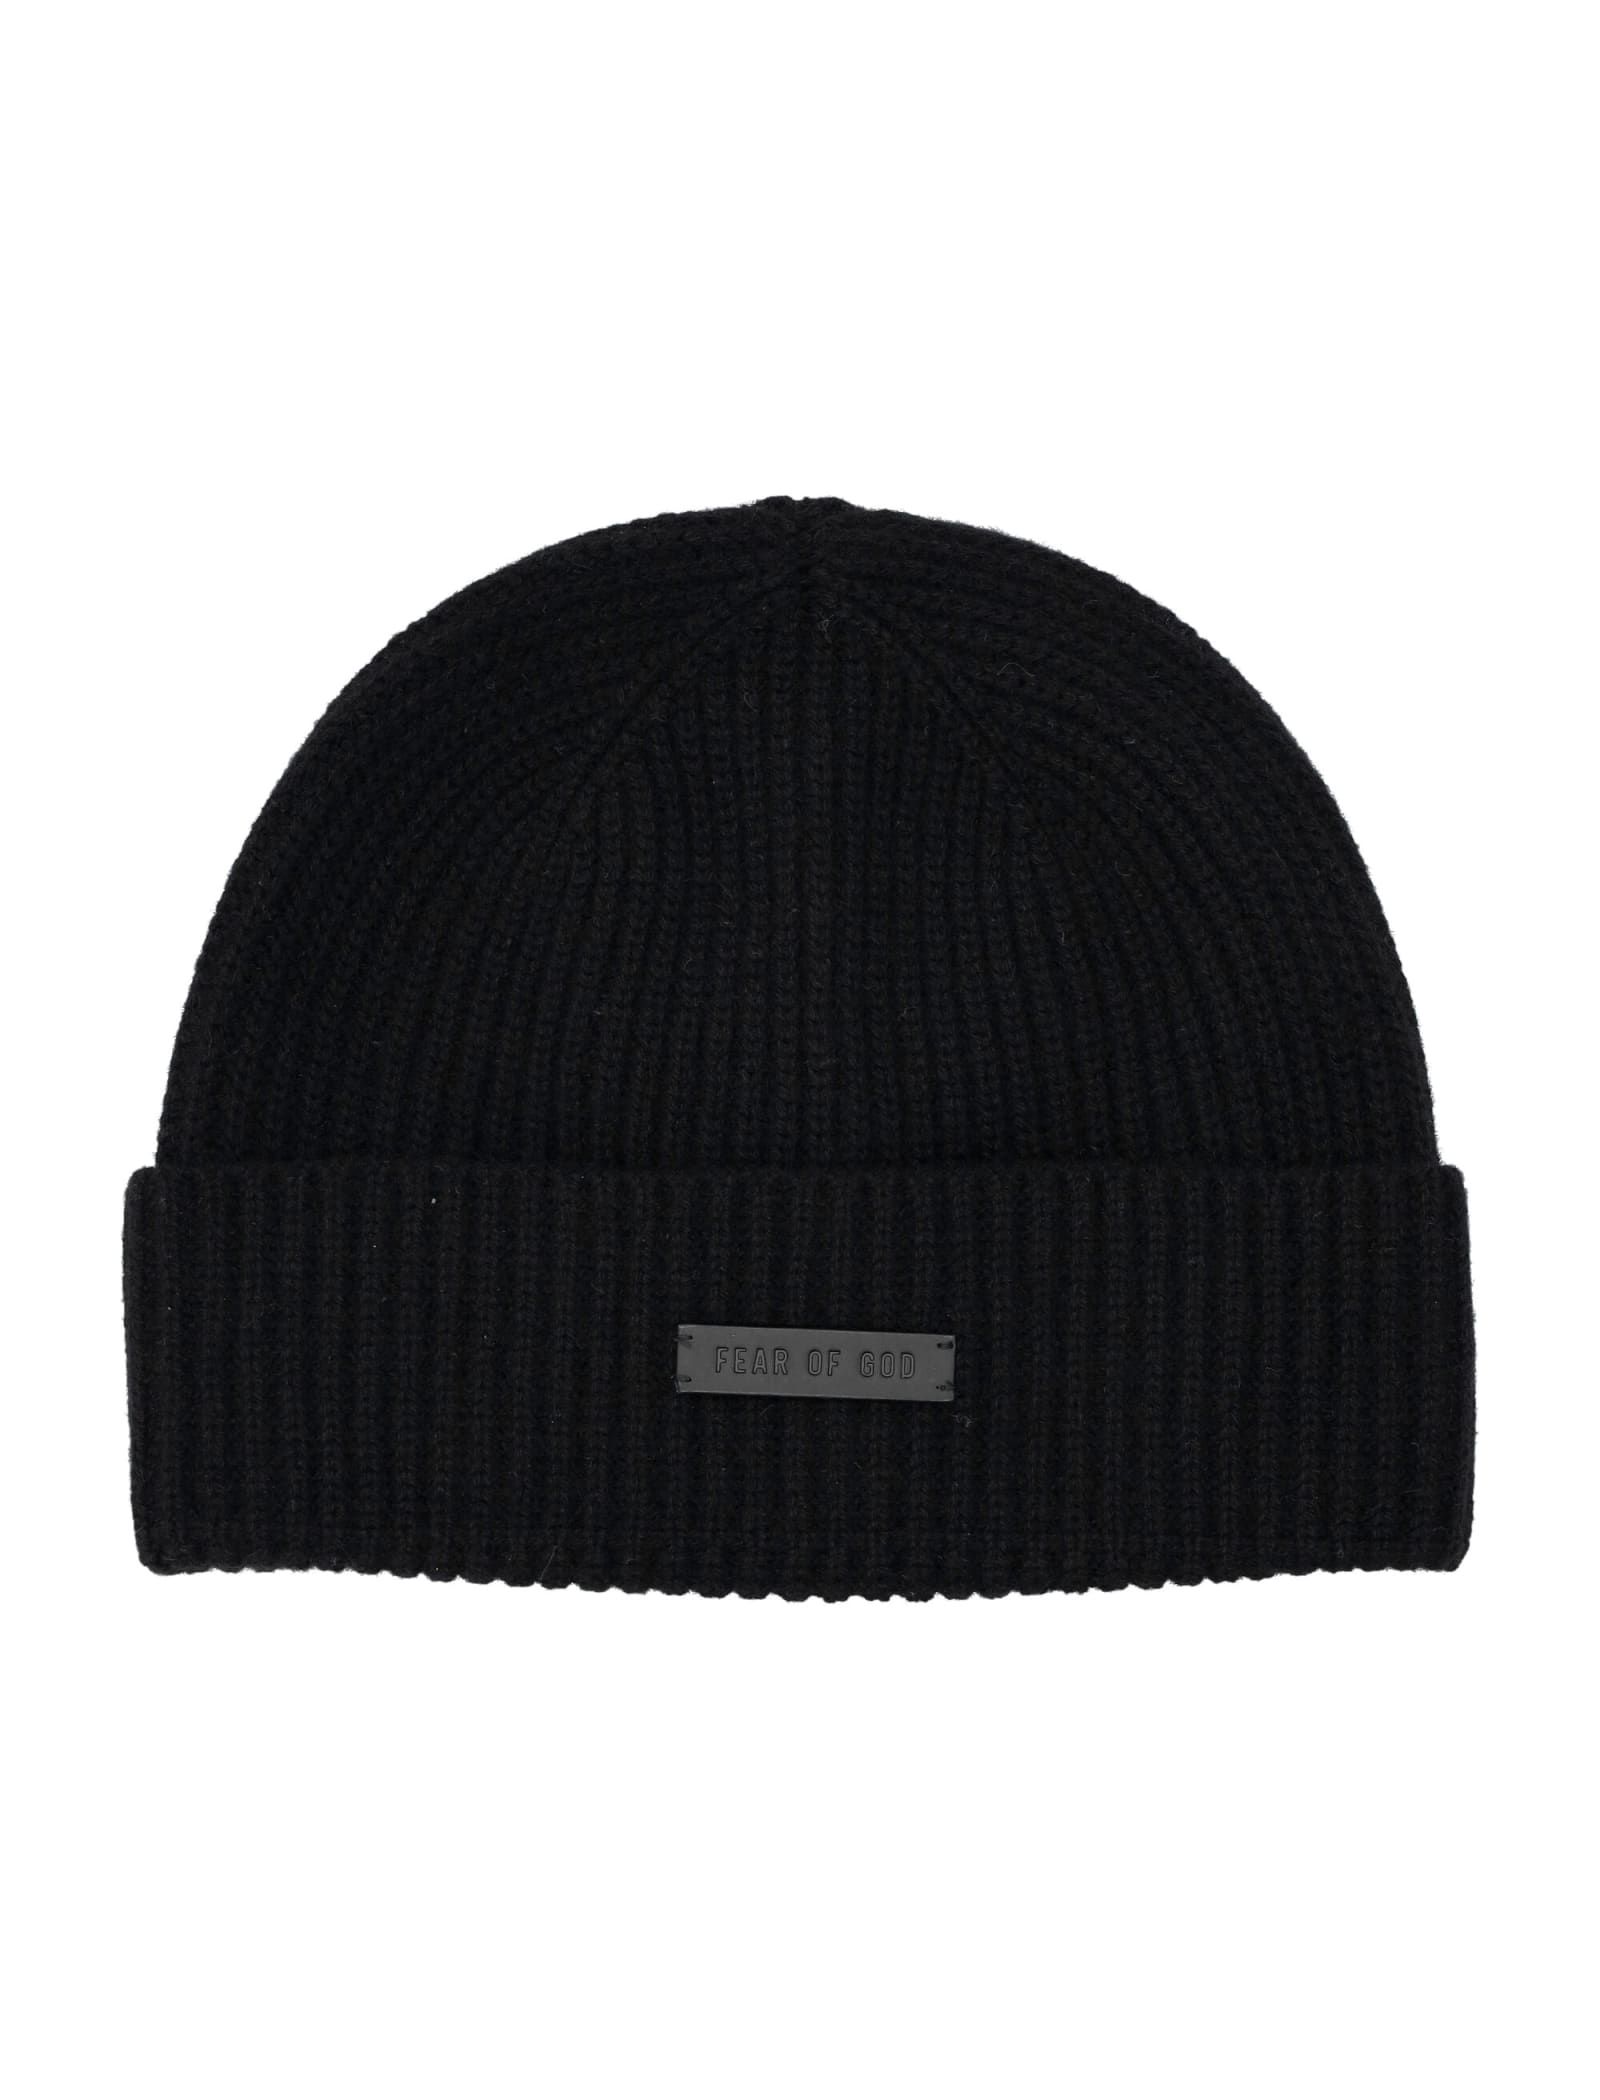 Fear of God Cashmere Beanie